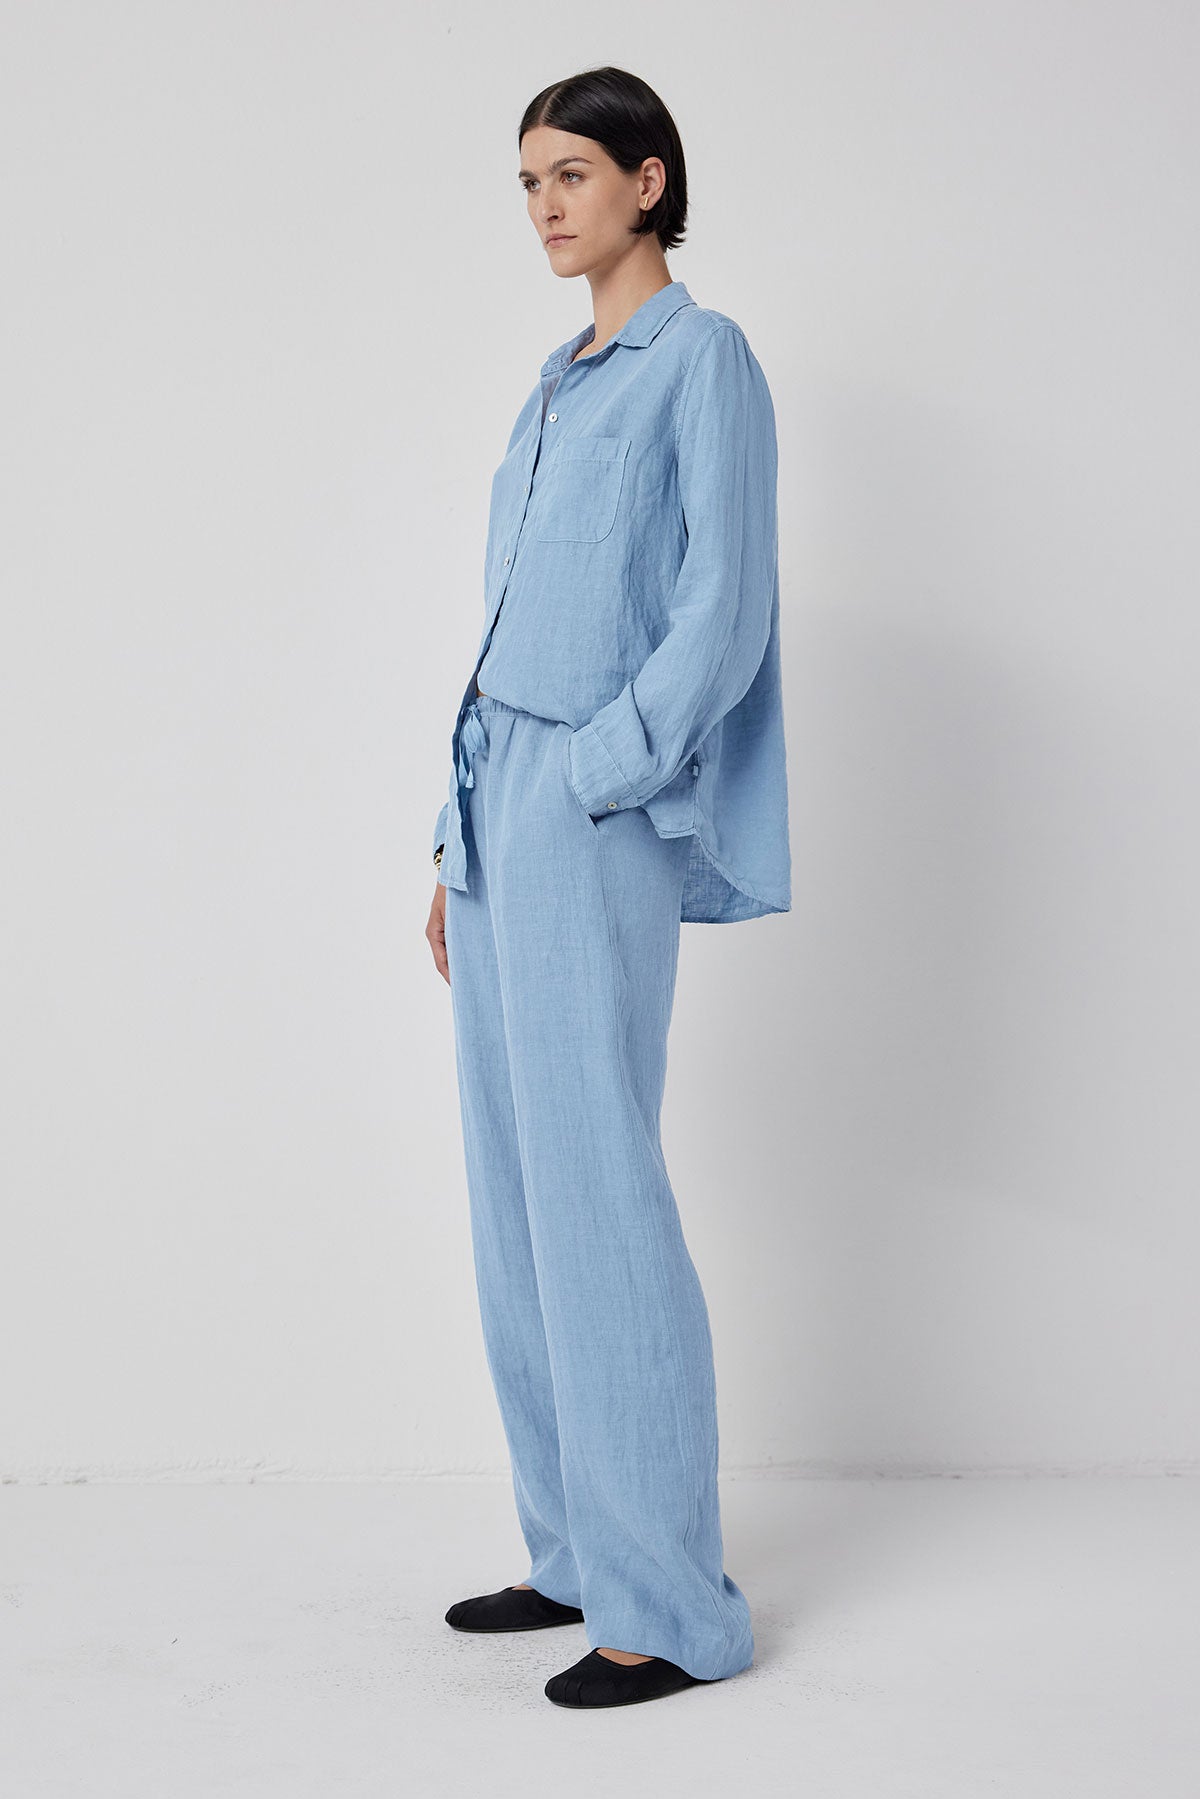 A woman in a light blue linen shirt and matching PICO LINEN PANT with an elastic waist stands against a white background, looking to the side. Brand: Velvet by Jenny Graham-36212497907905